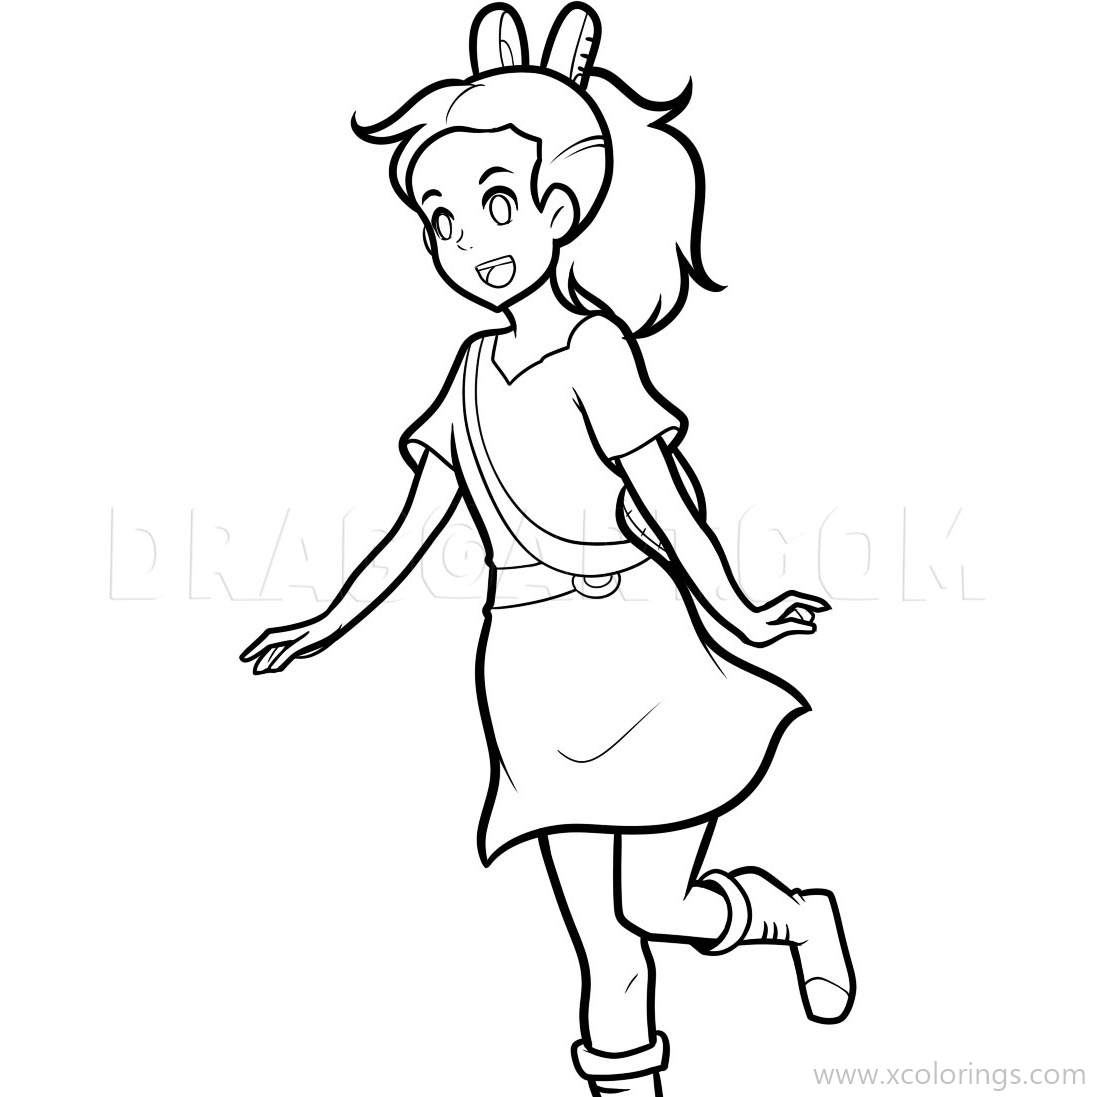 Free The Secret World of Arrietty Coloring Pages Lineart of Arrietty printable